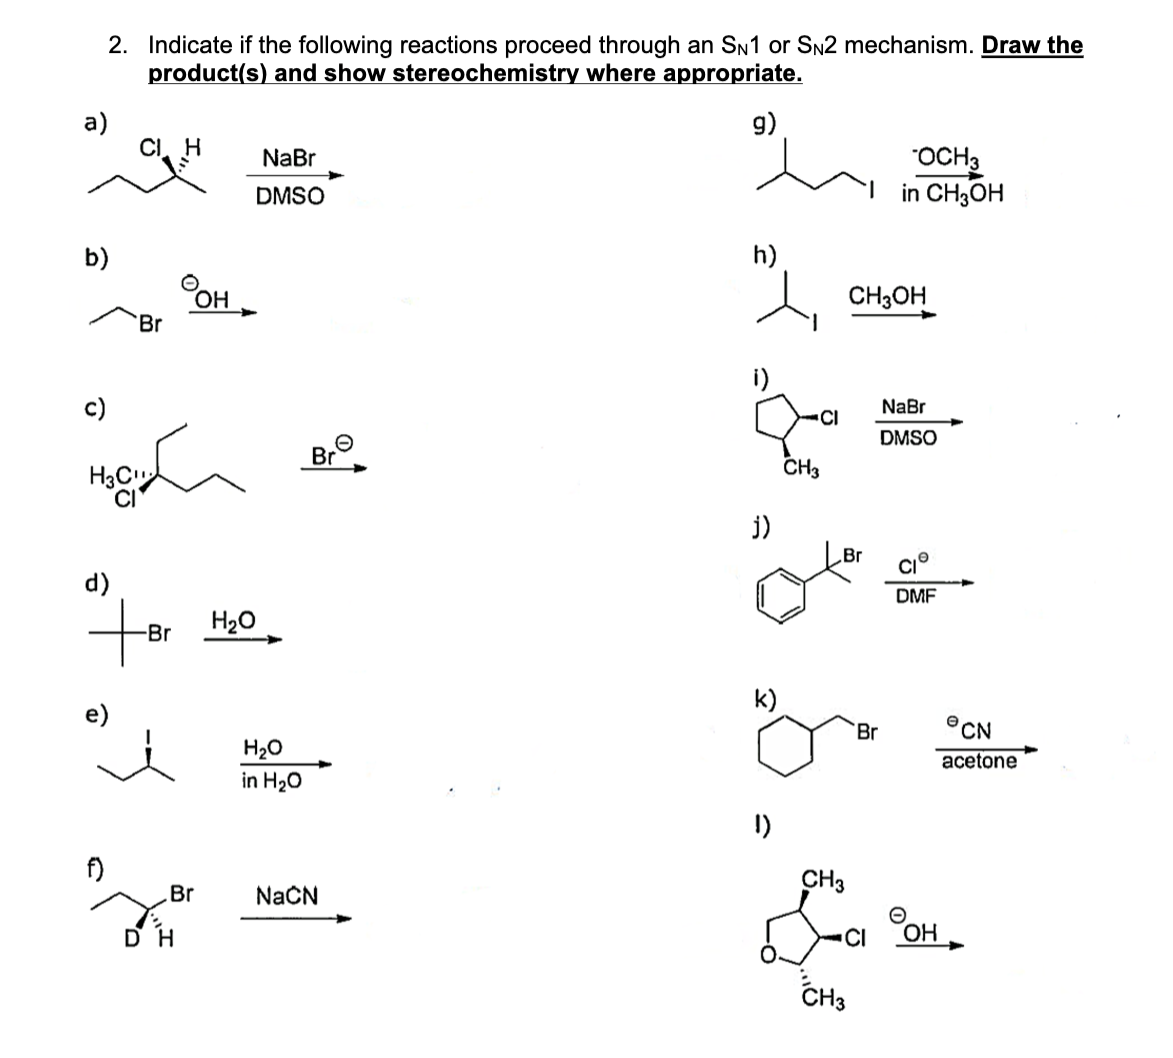 2. Indicate if the following reactions proceed through an SN1 or SN2 mechanism. Draw the
product(s) and show stereochemistry where appropriate.
g)
a)
b)
CI H
f)
Br
OH
Br
недби лю
H3C
d)
+Br H₂0₂
NaBr
DMSO
Br
DH
H₂O
in H₂O
NaCN
h)
j)
k)
CI
CH3
CH3OH
.Br
OCH3
in CH3OH
Br
1)
CH3
L
CH3
NaBr
DMSO
DMF
CI OH
CN
acetone